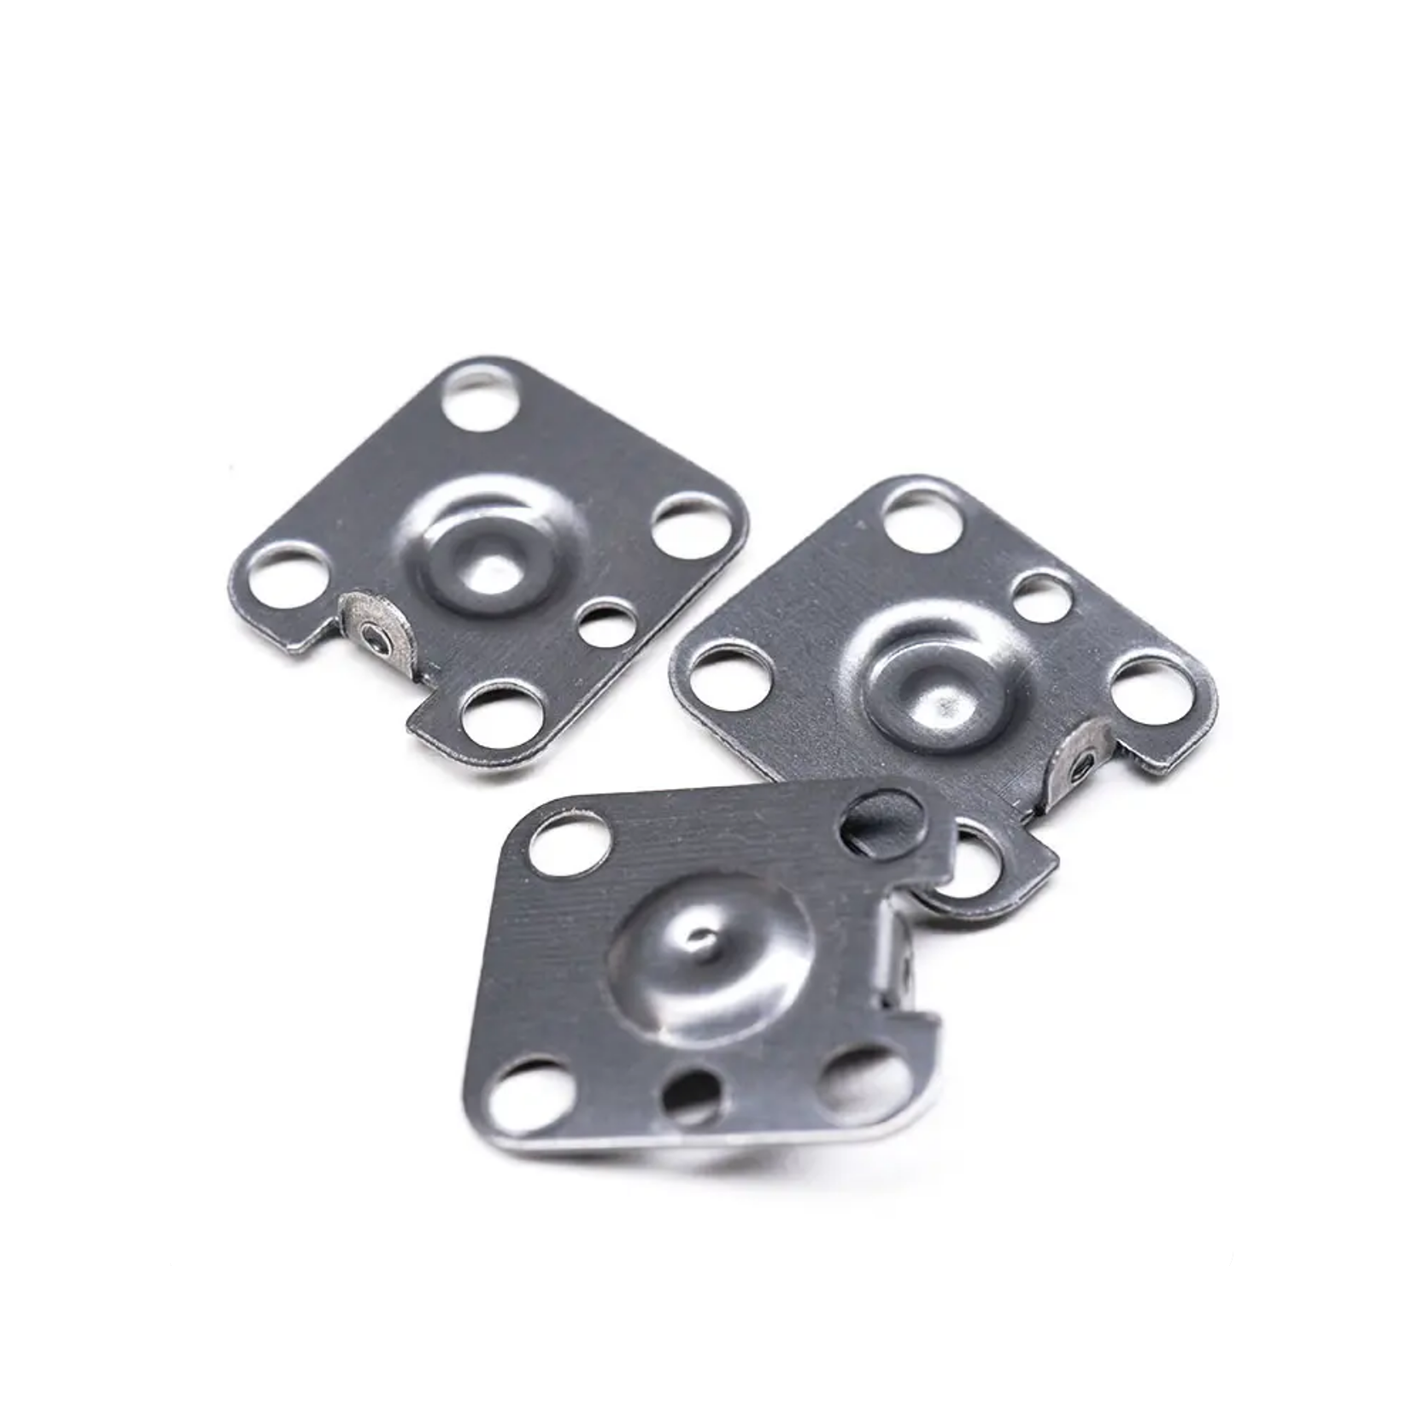 OEM precision steel stampings parts suppliers